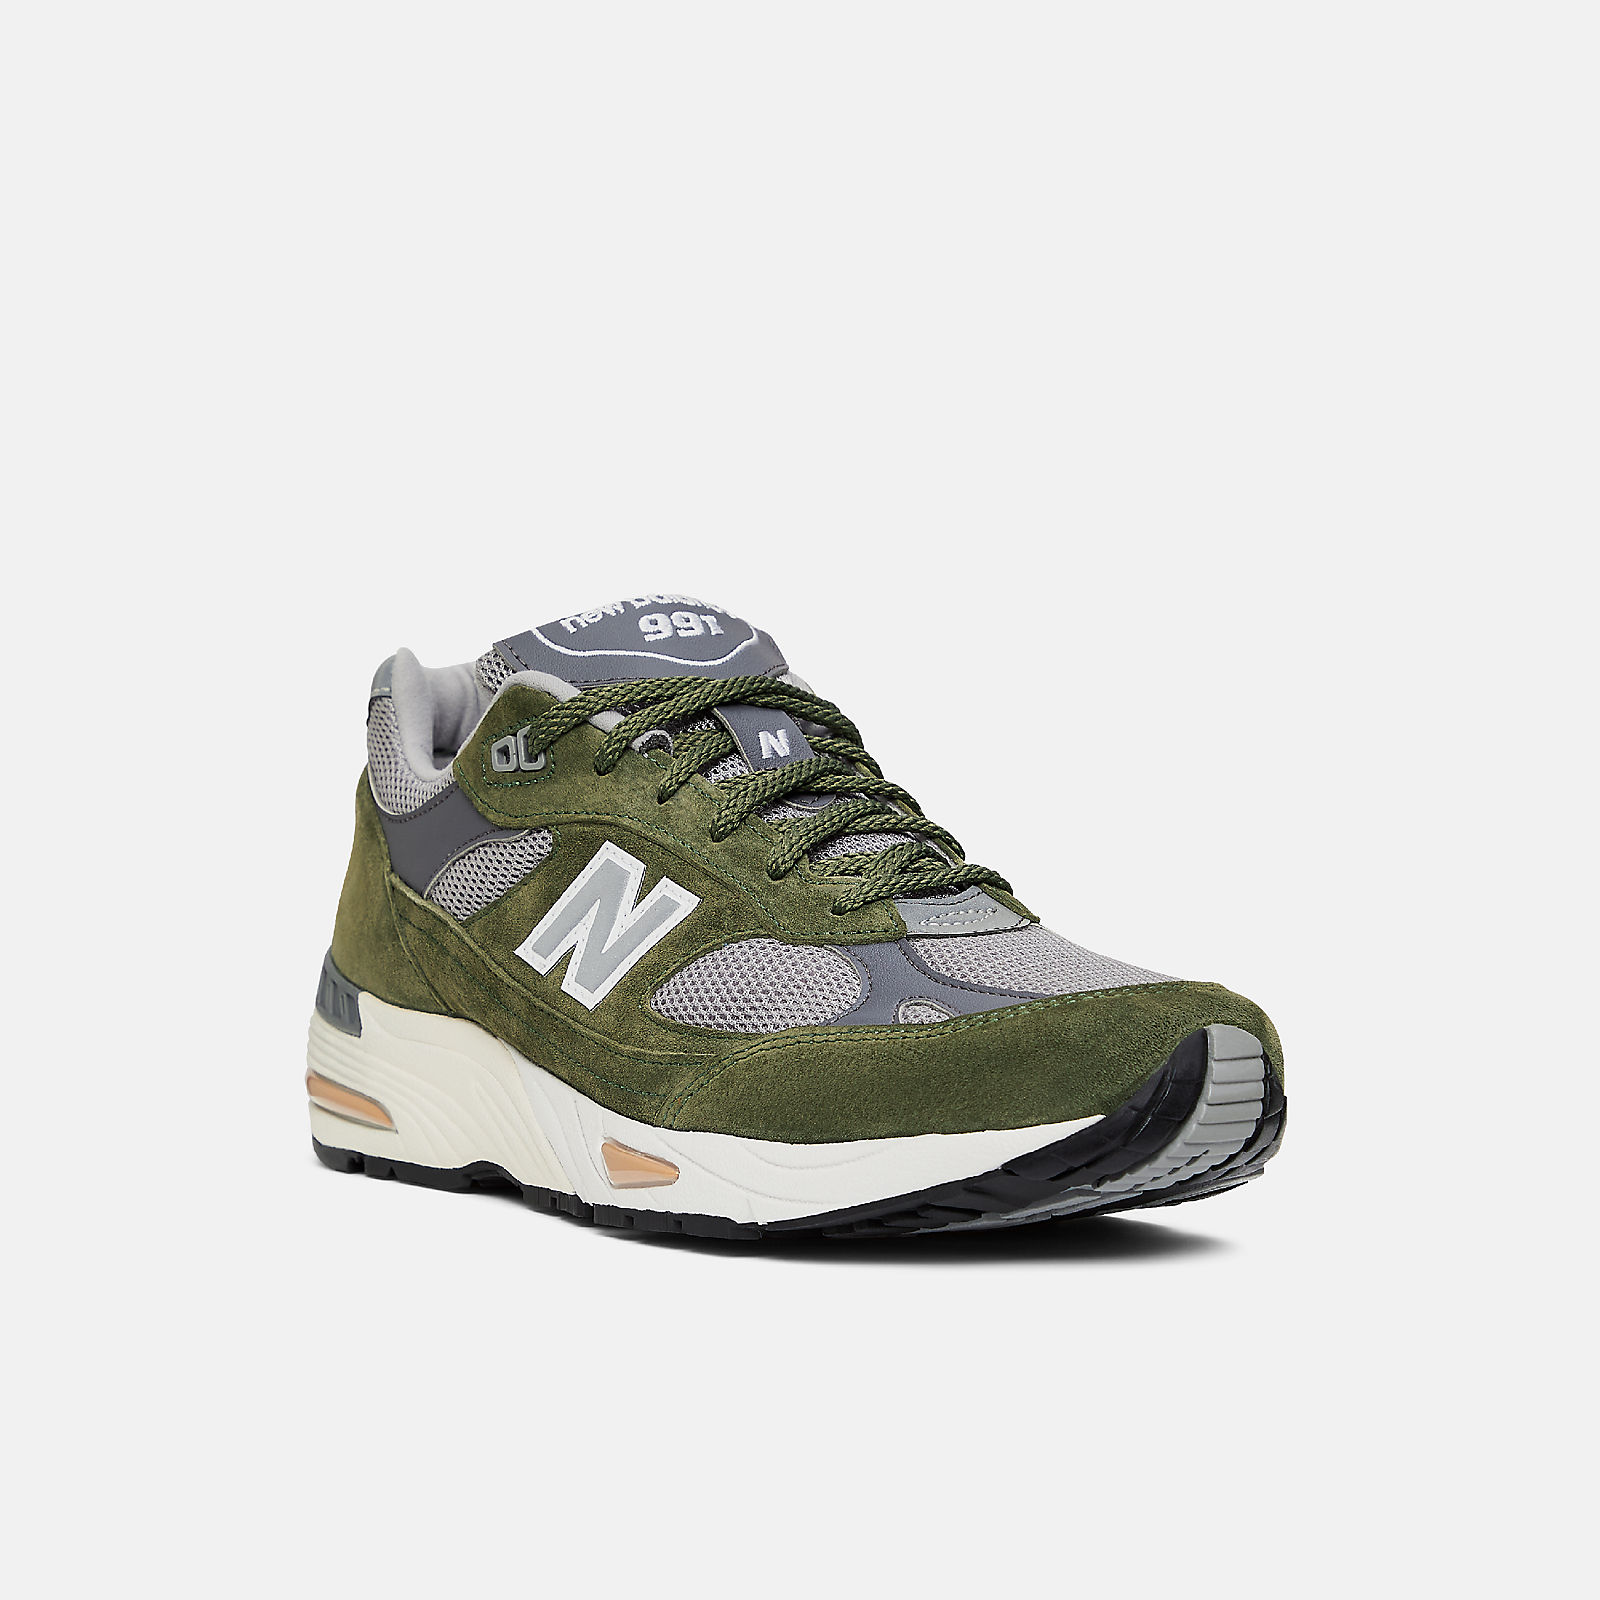 Men's MADE in UK 991 Shoes - New Balance